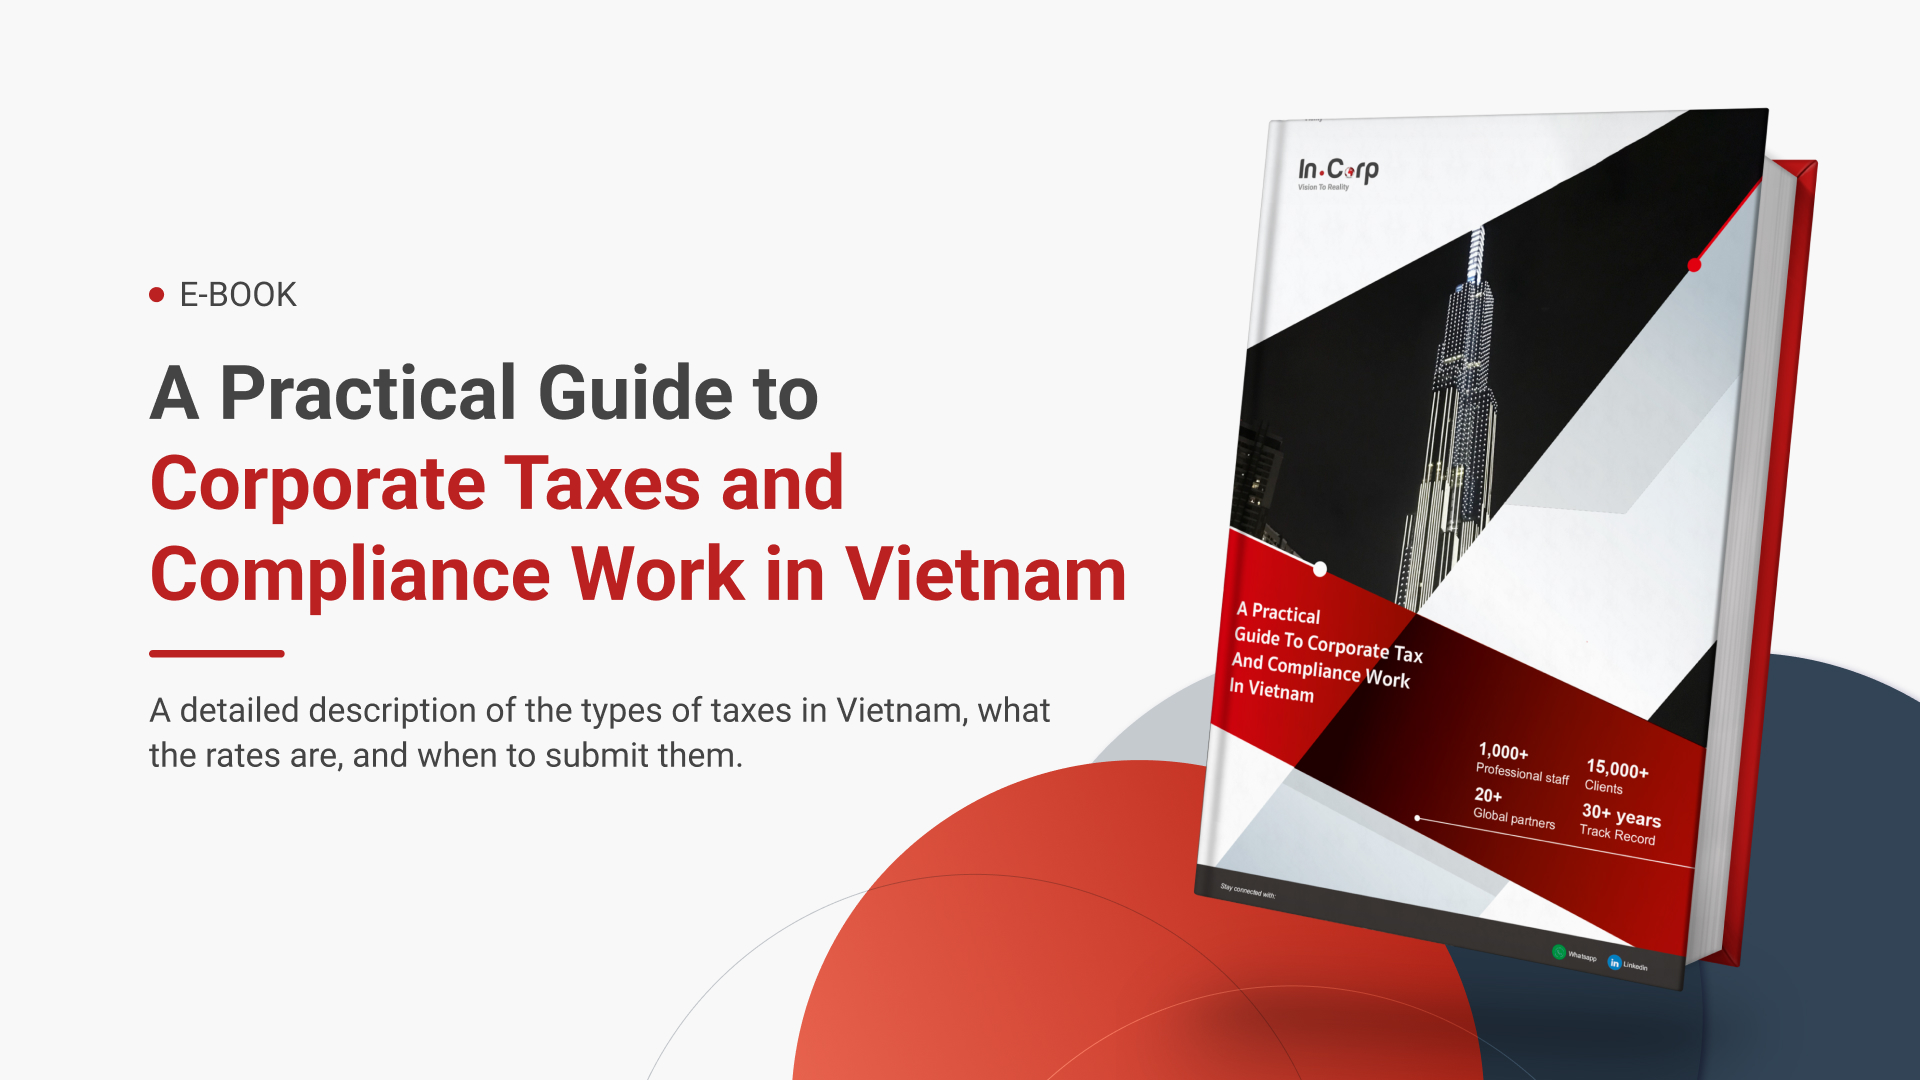 A Practical Guide to Corporate Taxes and Compliance Work in Vietnam